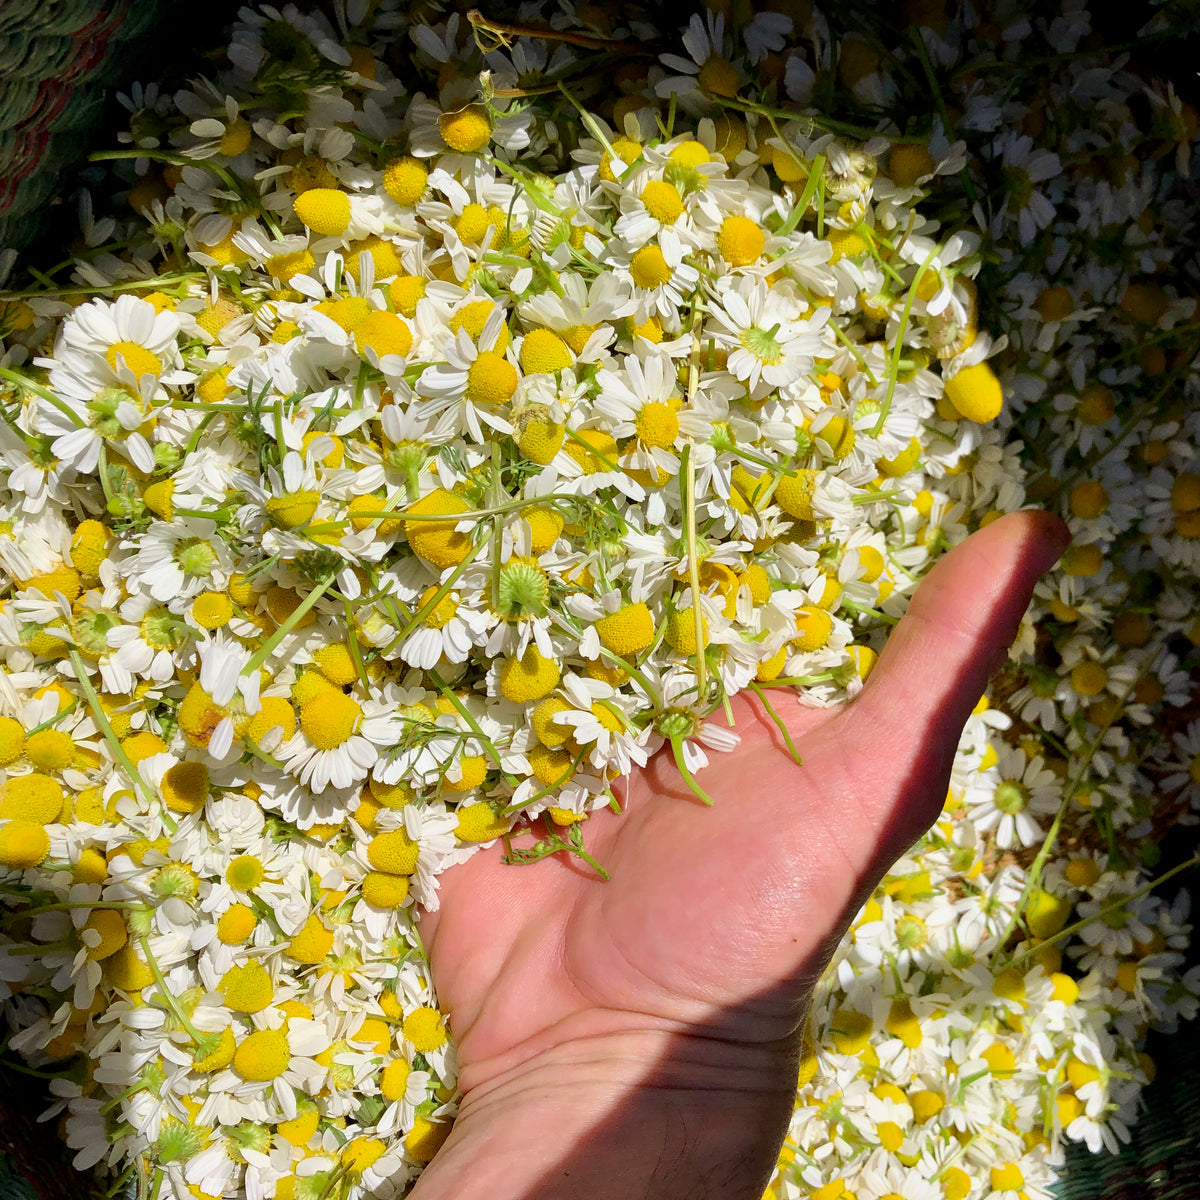 German Chamomile Blossoms being held by a hand